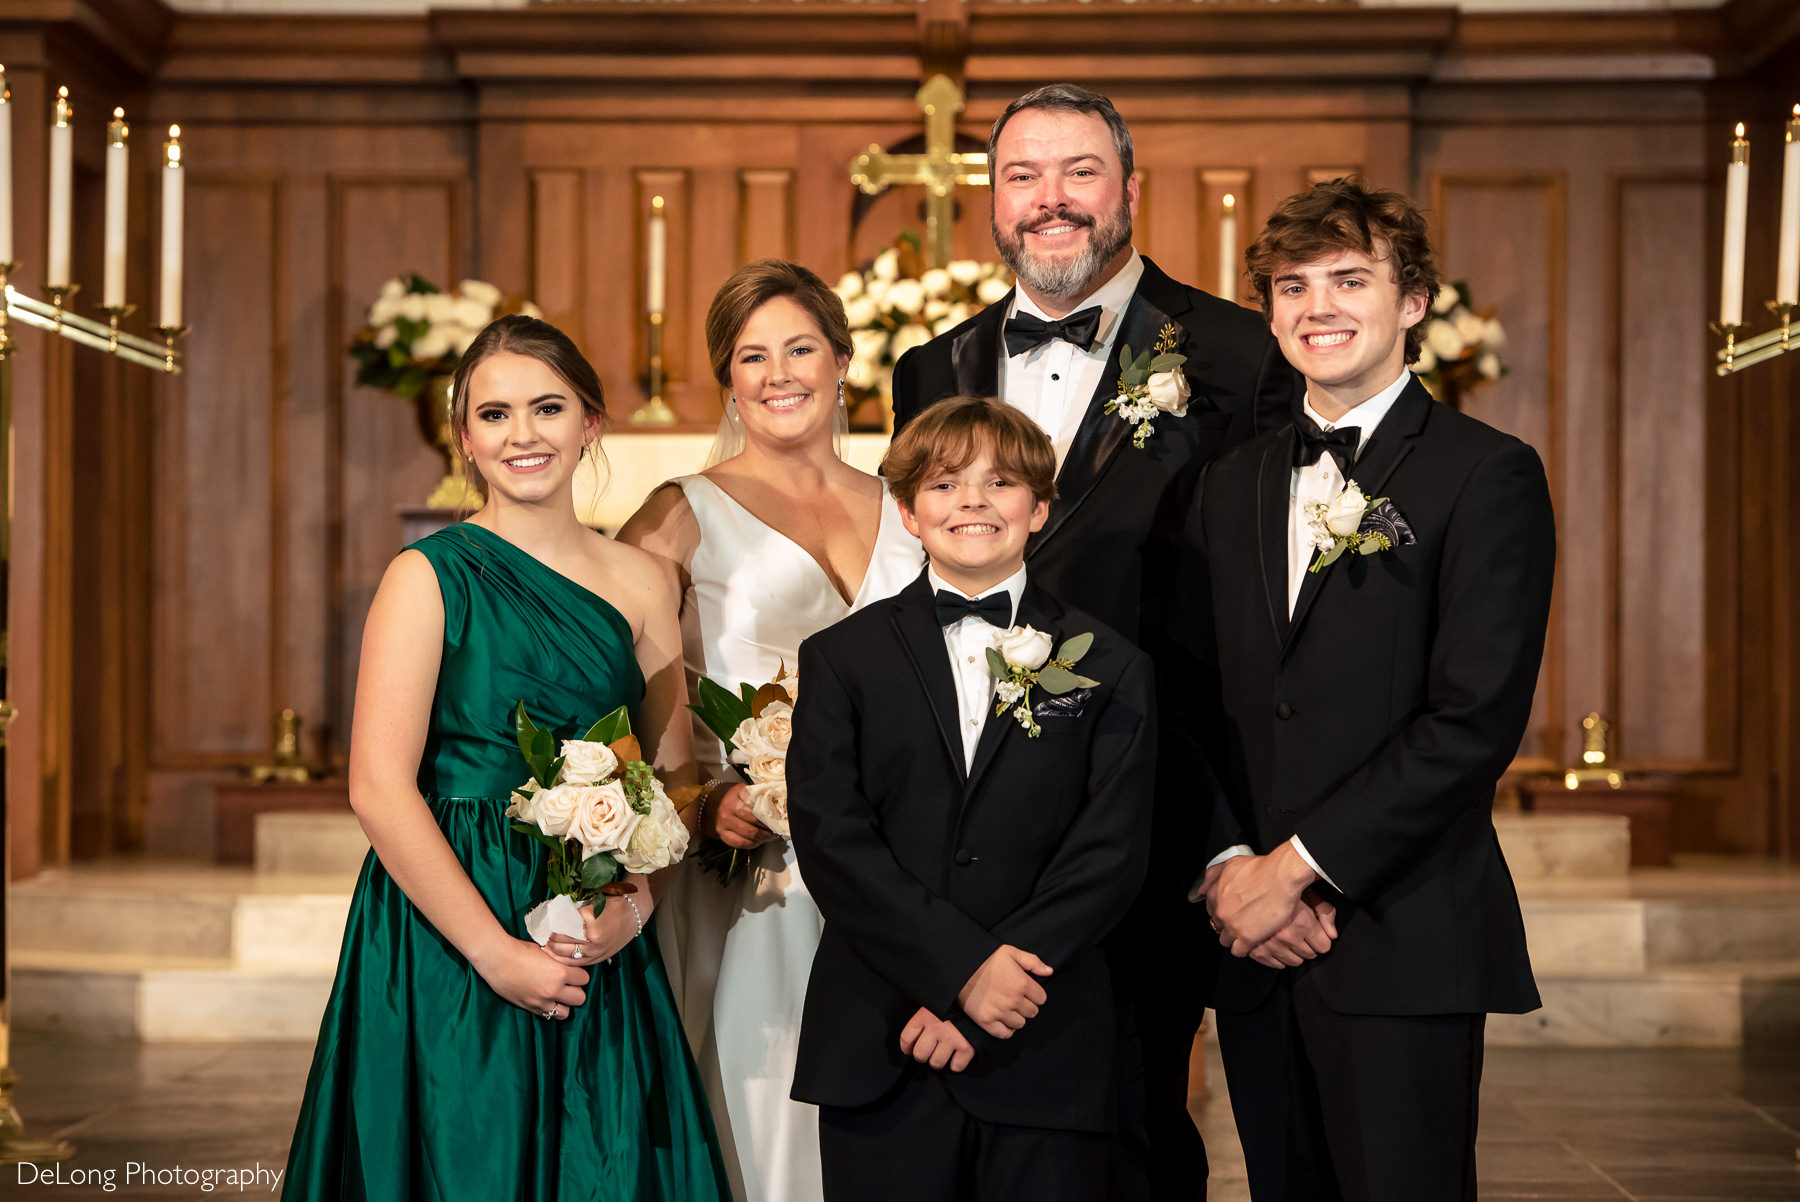 New family portrait at Providence Methodist Church by Charlotte Wedding Photographers DeLong Photography